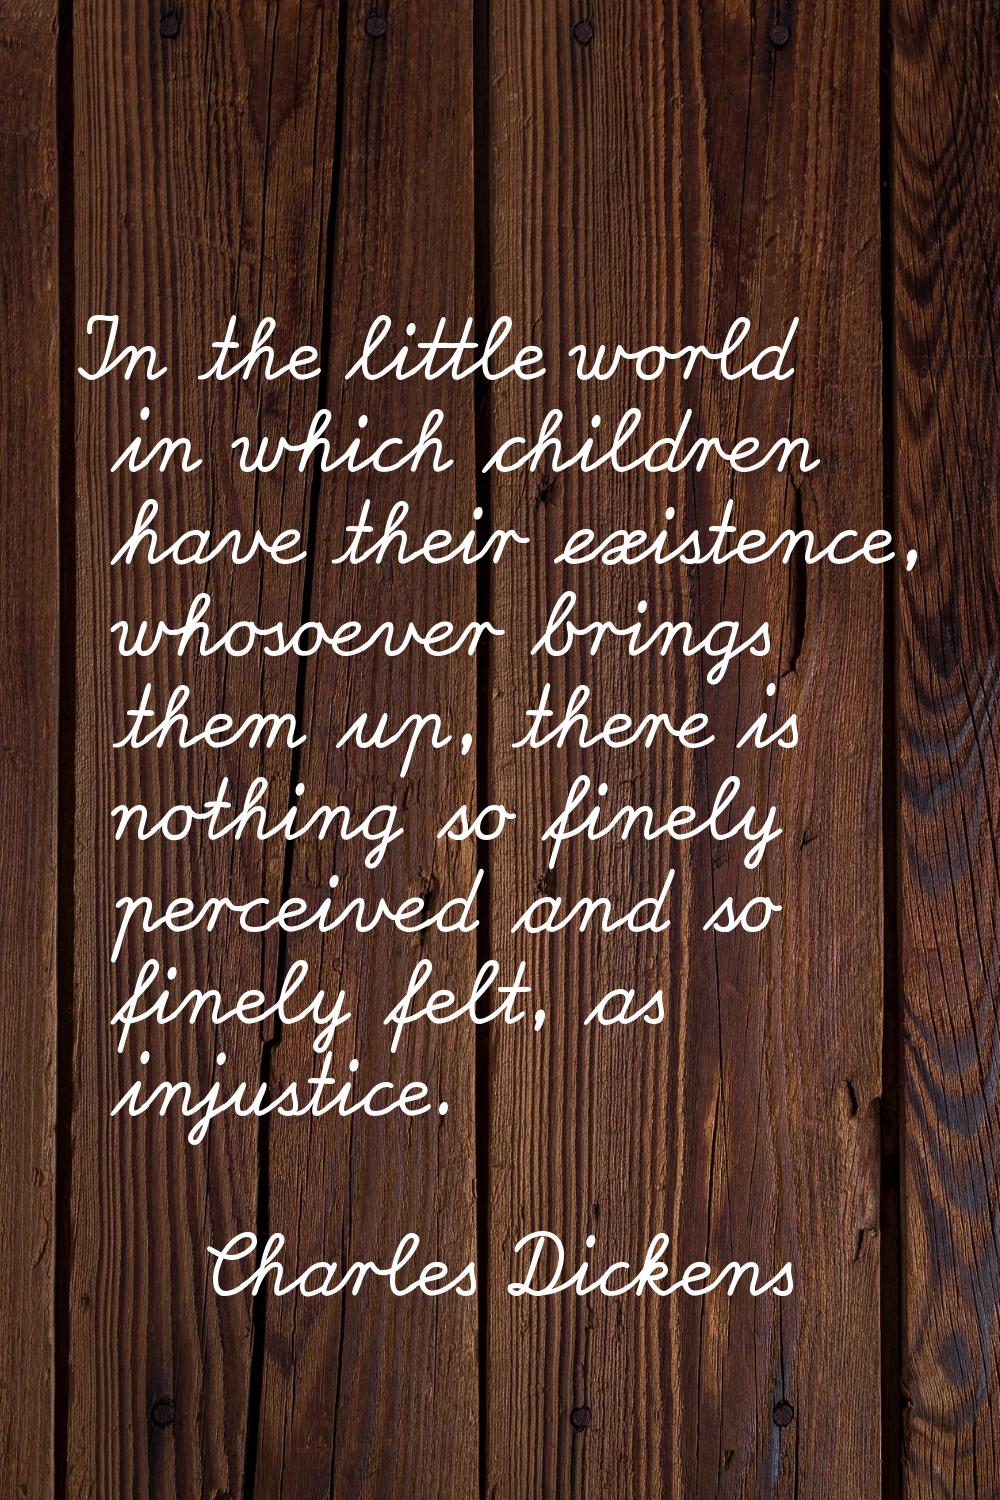 In the little world in which children have their existence, whosoever brings them up, there is noth